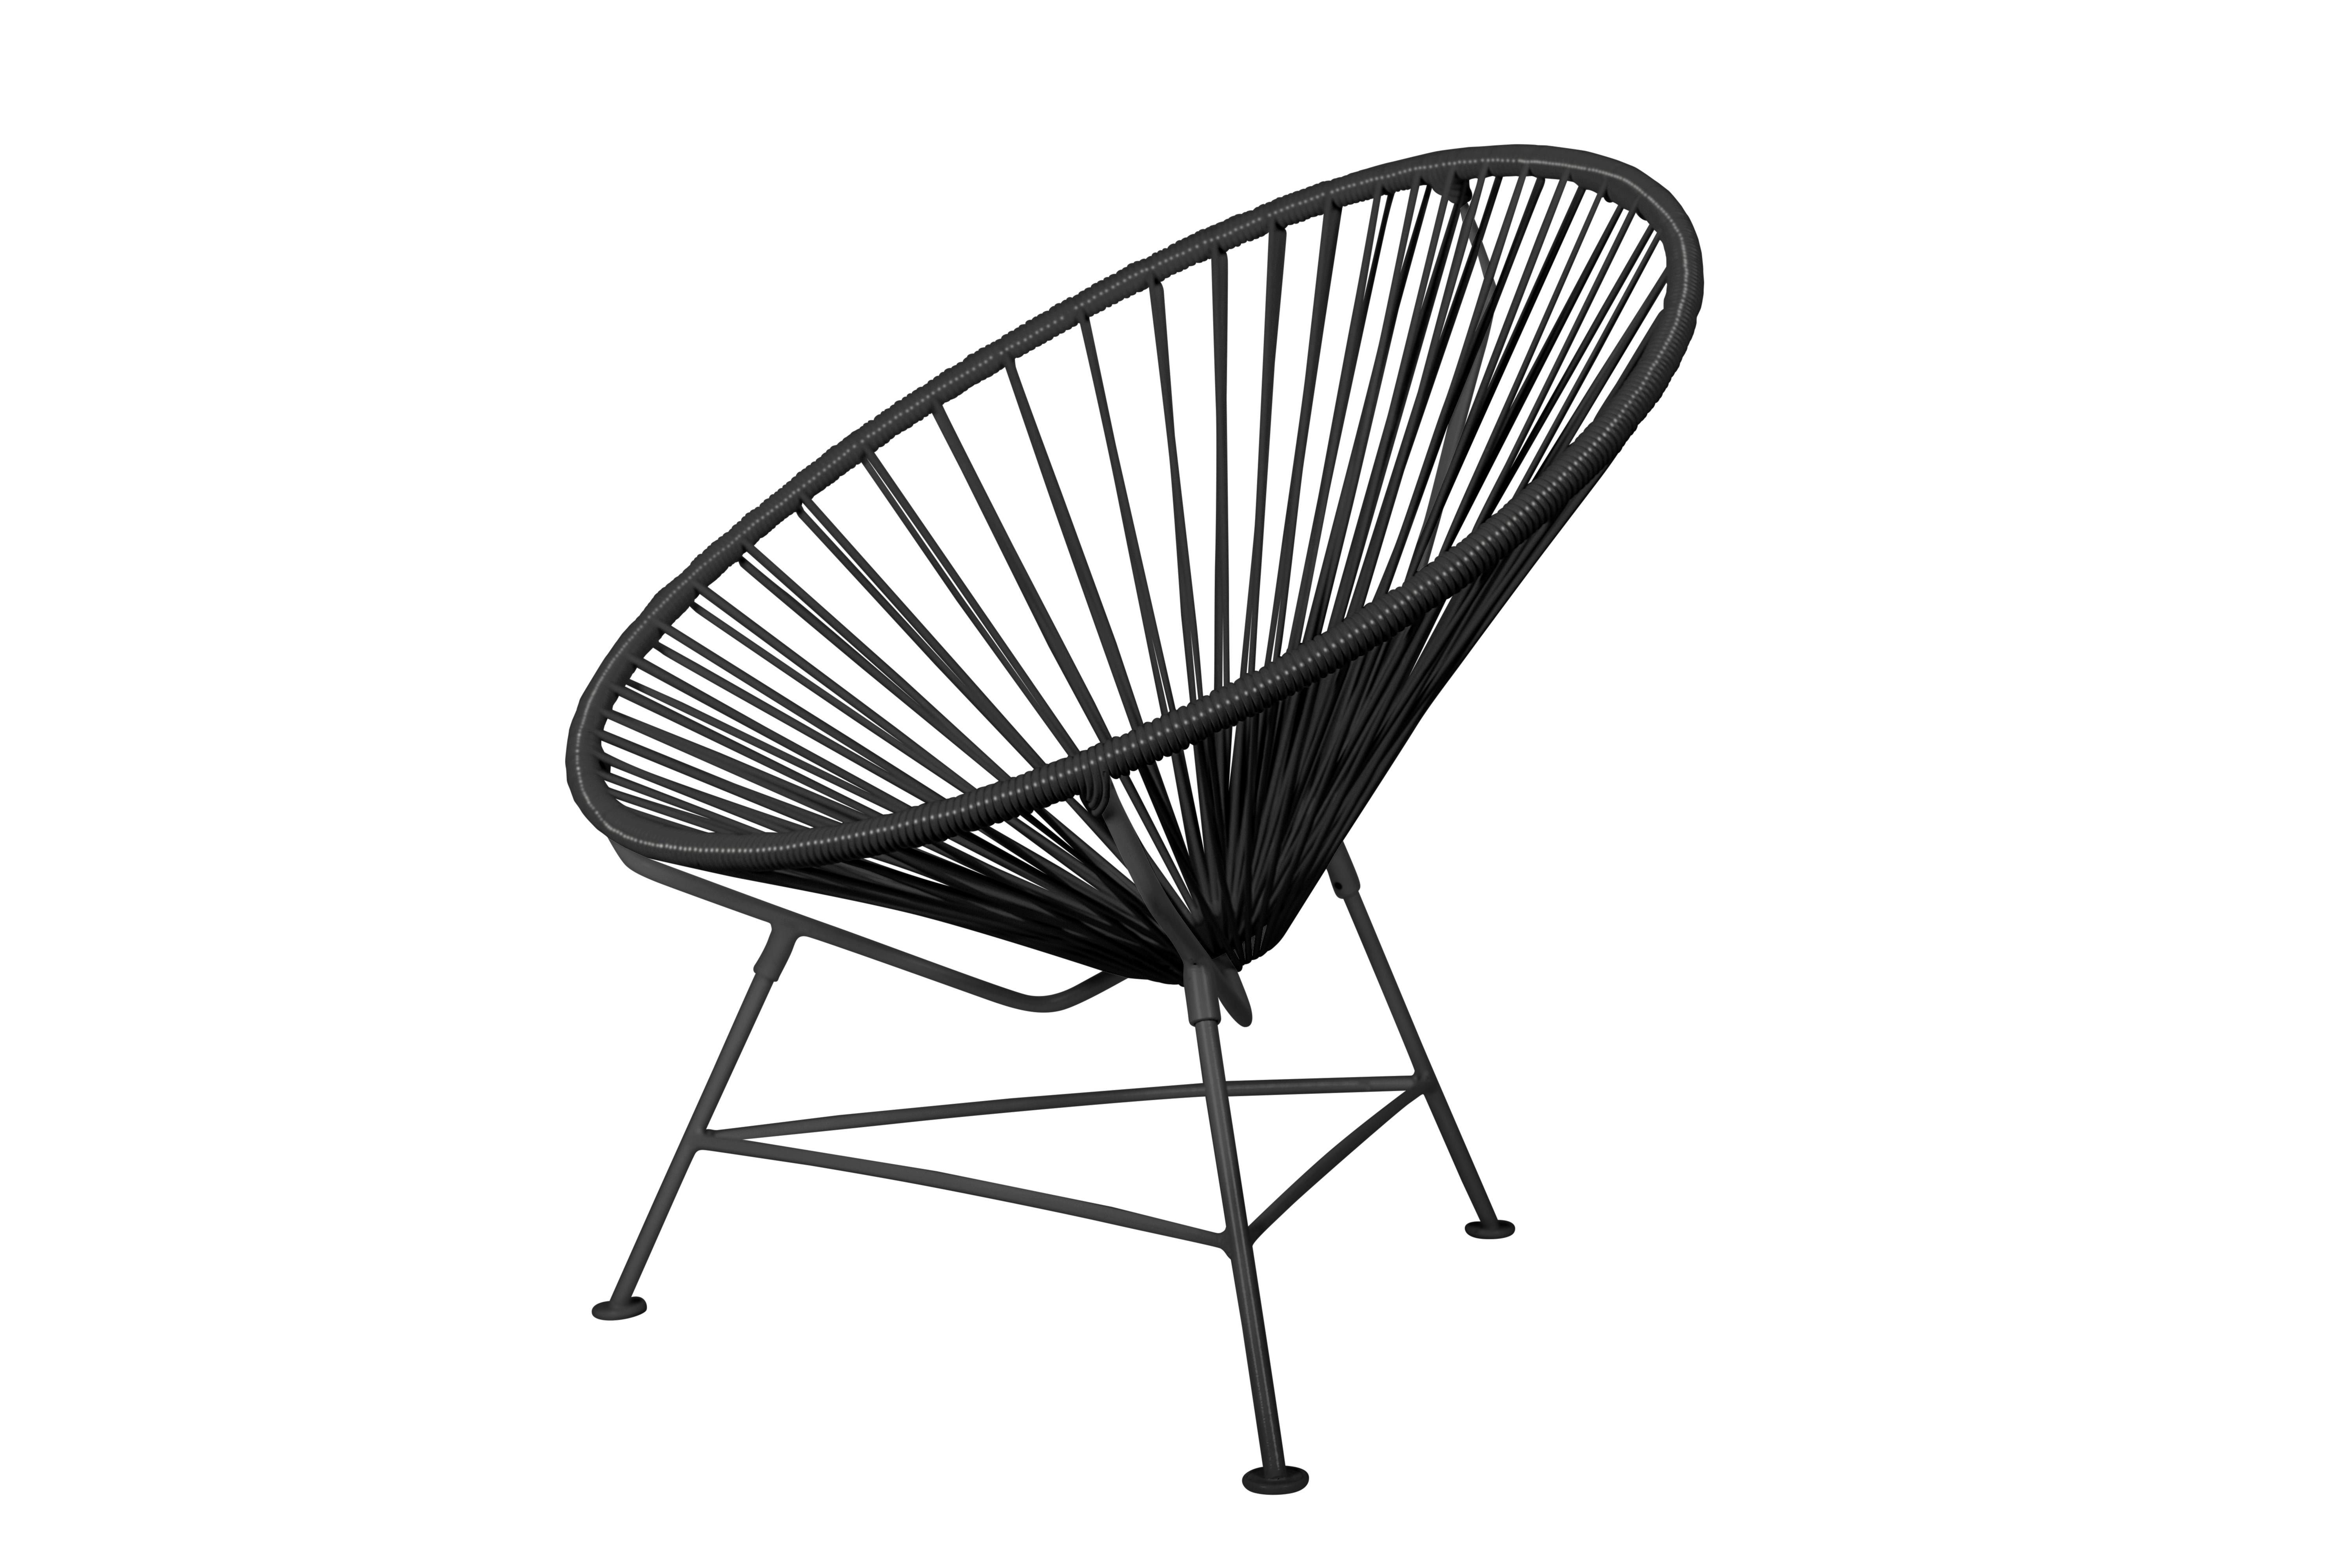 Comfortable without a cushion and made to last stylishly for years - thanks to its durable powder coated steel frame and colorfast UV-resistant woven vinyl cord - this lounge chair will add a hip vibe to your space, whether indoors or out. Available